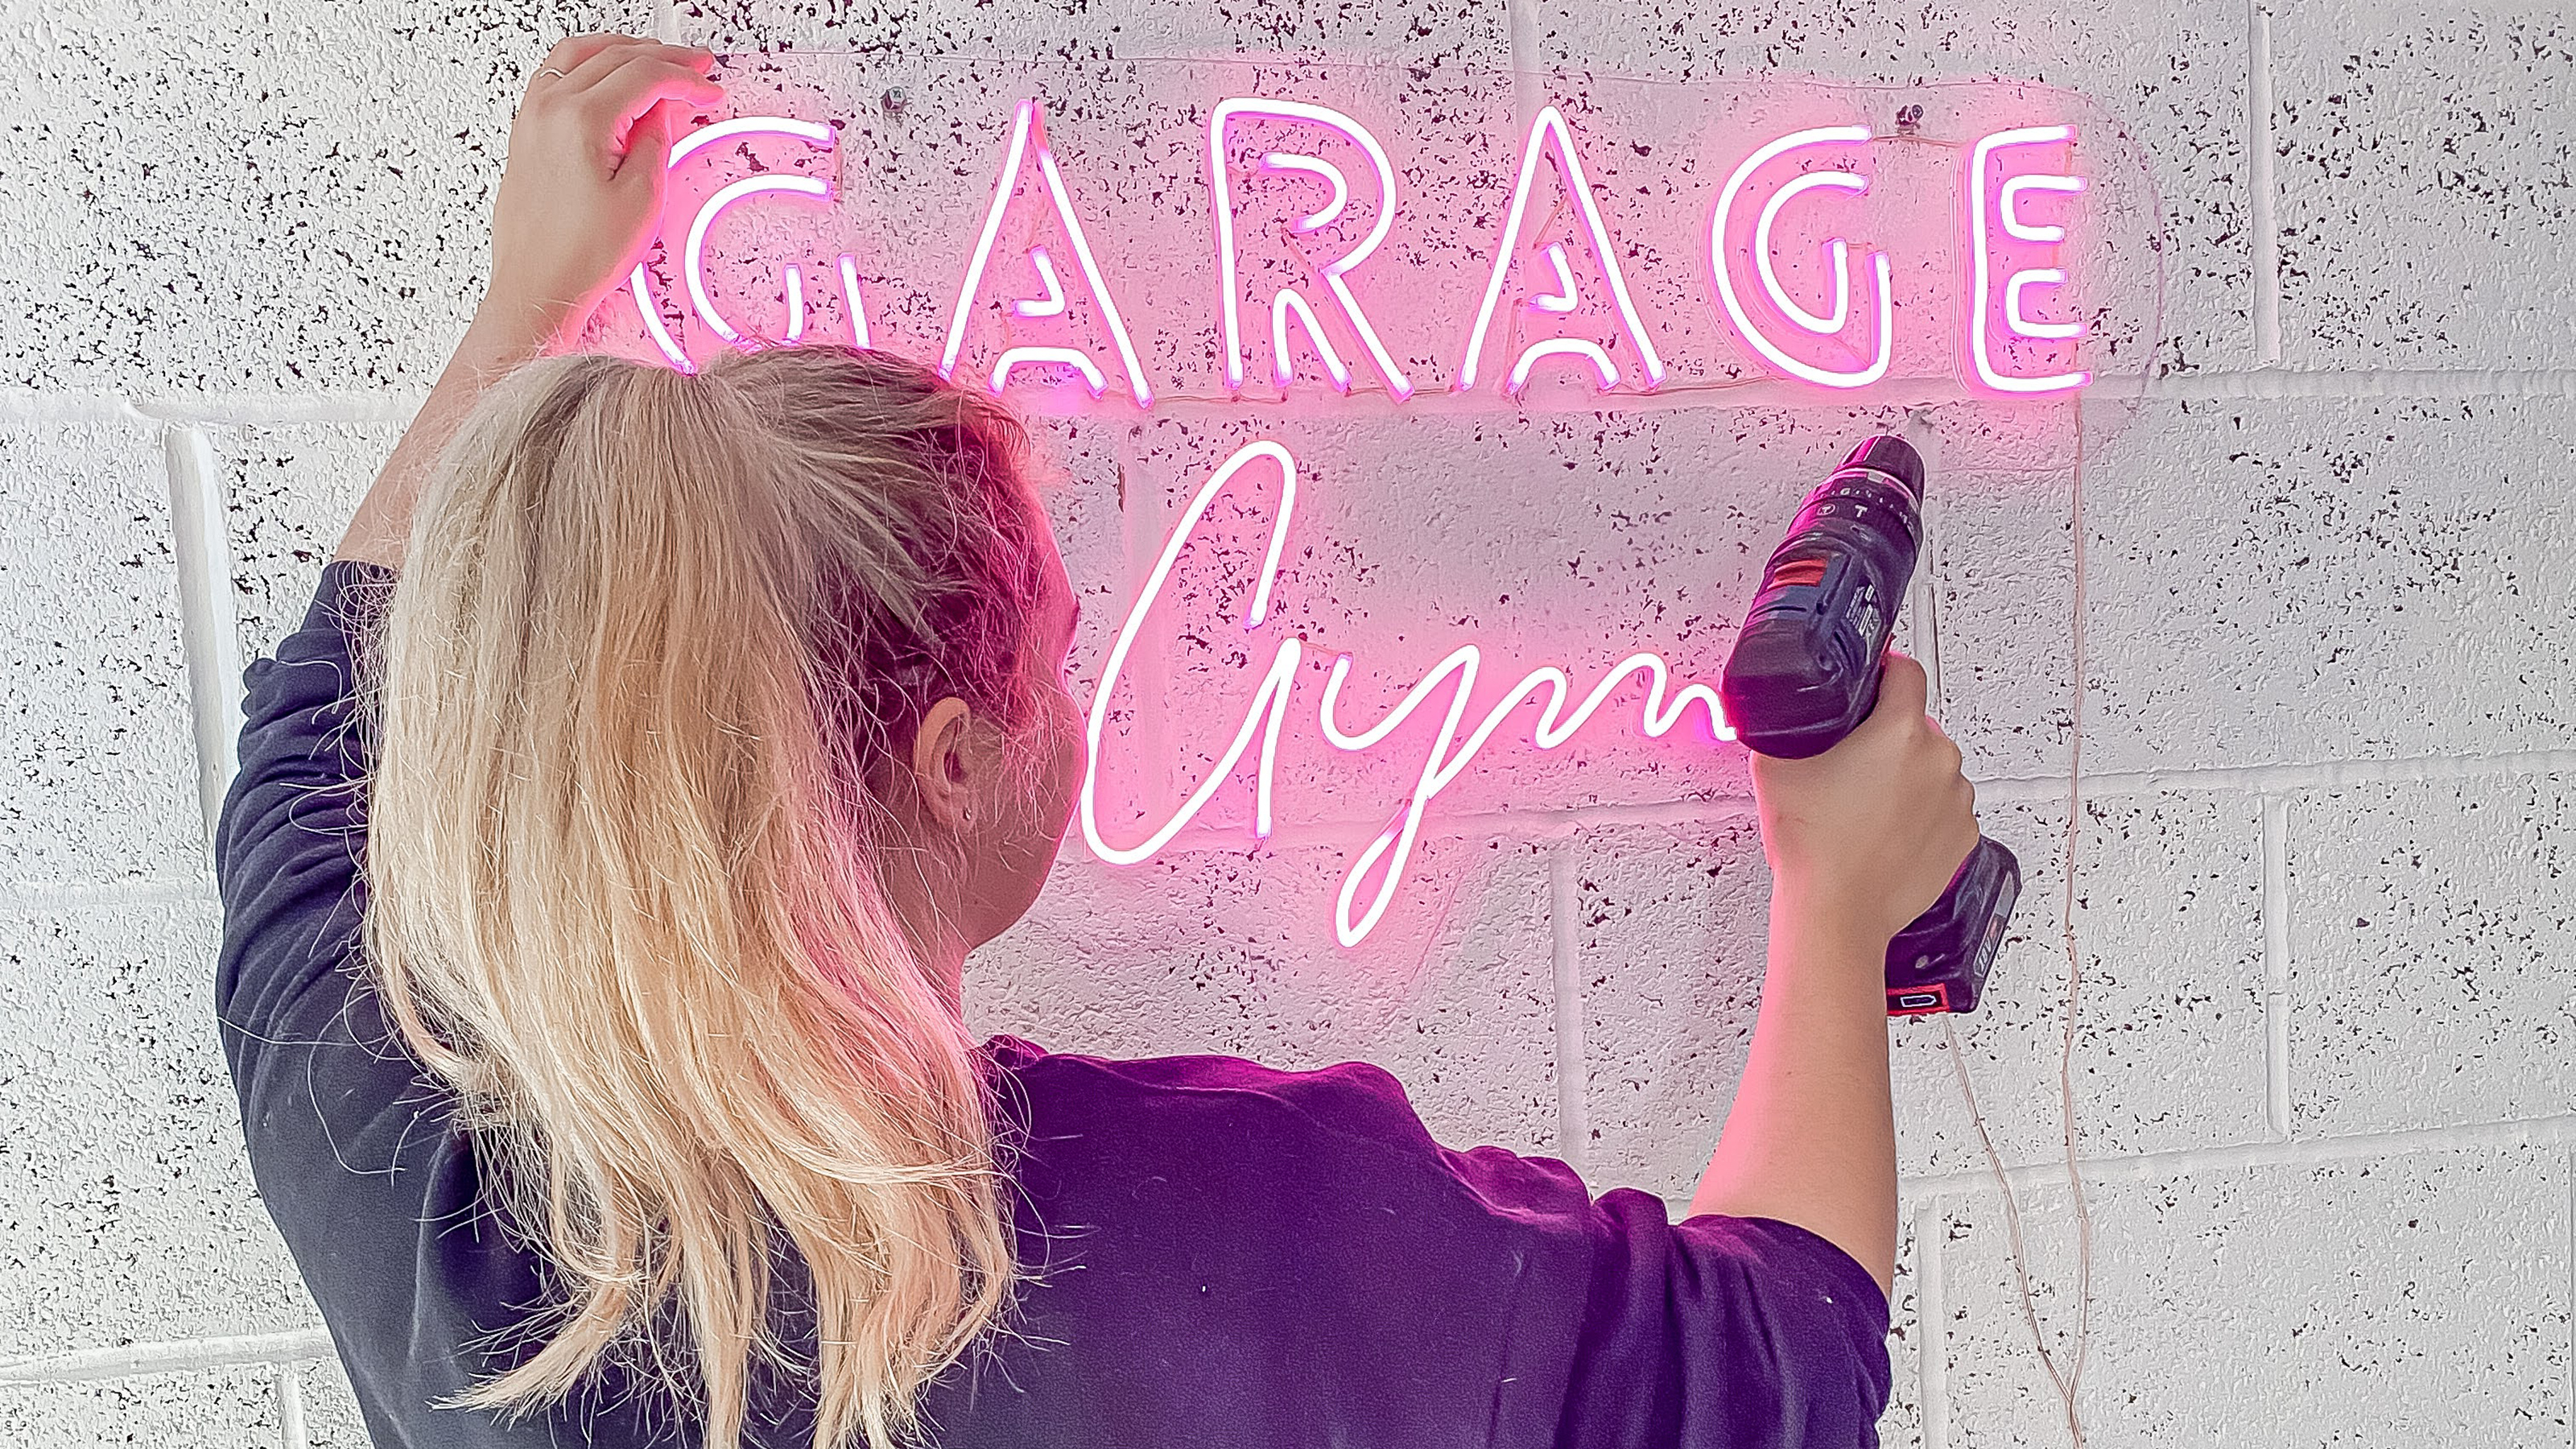 How To Make a Custom Neon LED Sign! 